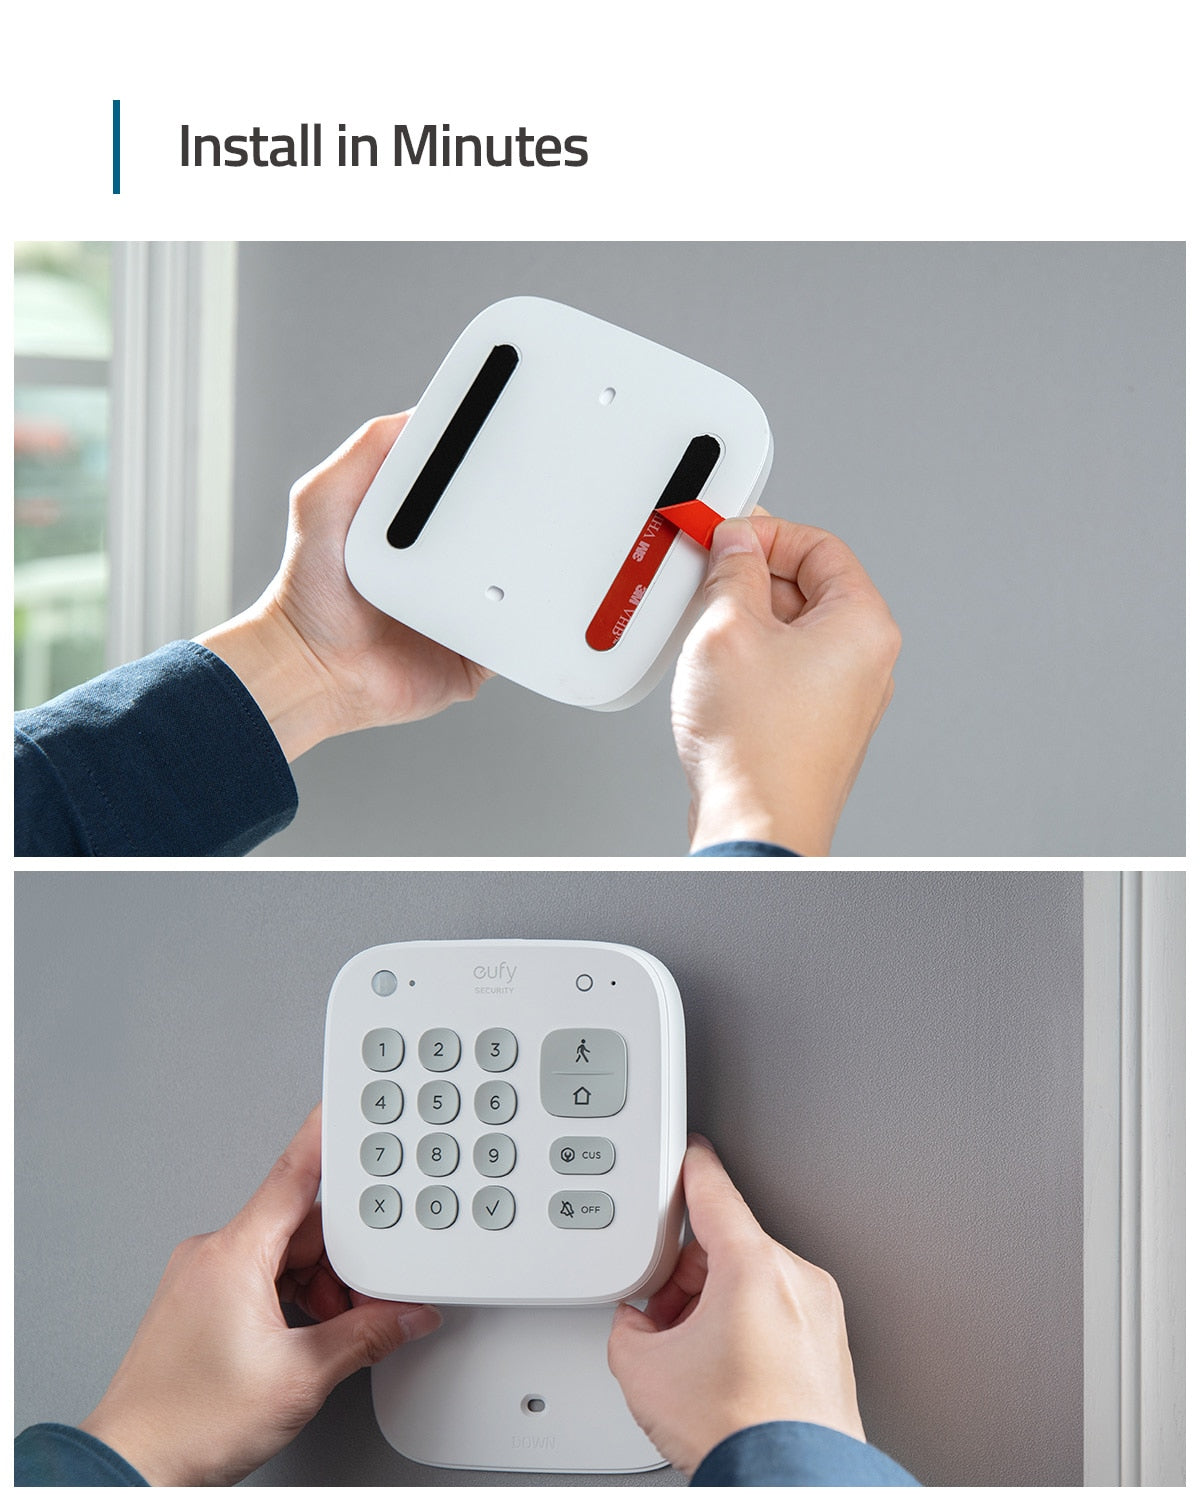 eufy Security Keypad Home Security System Home Alarm System 180-Day Battery Home & Away Security Modes Link to eufyCam